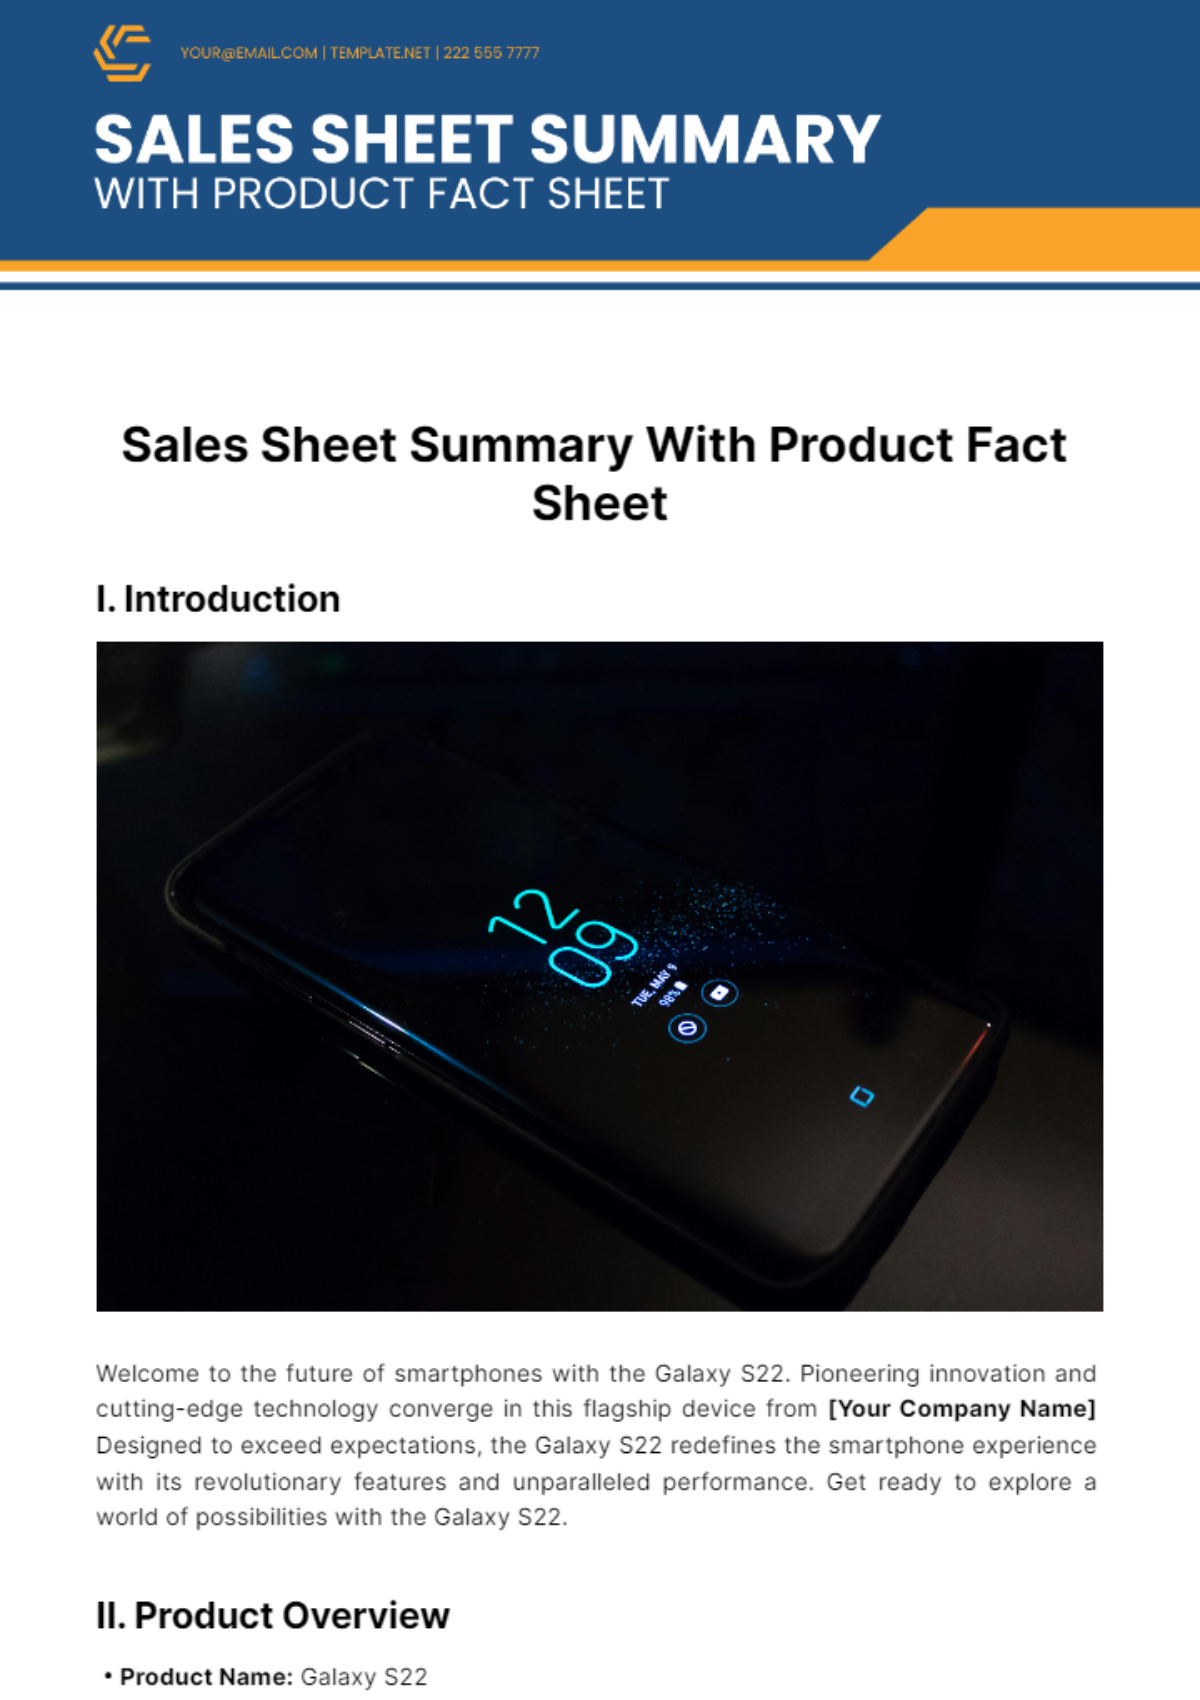 Free Sales Sheet Summary With Product Fact Sheet Template